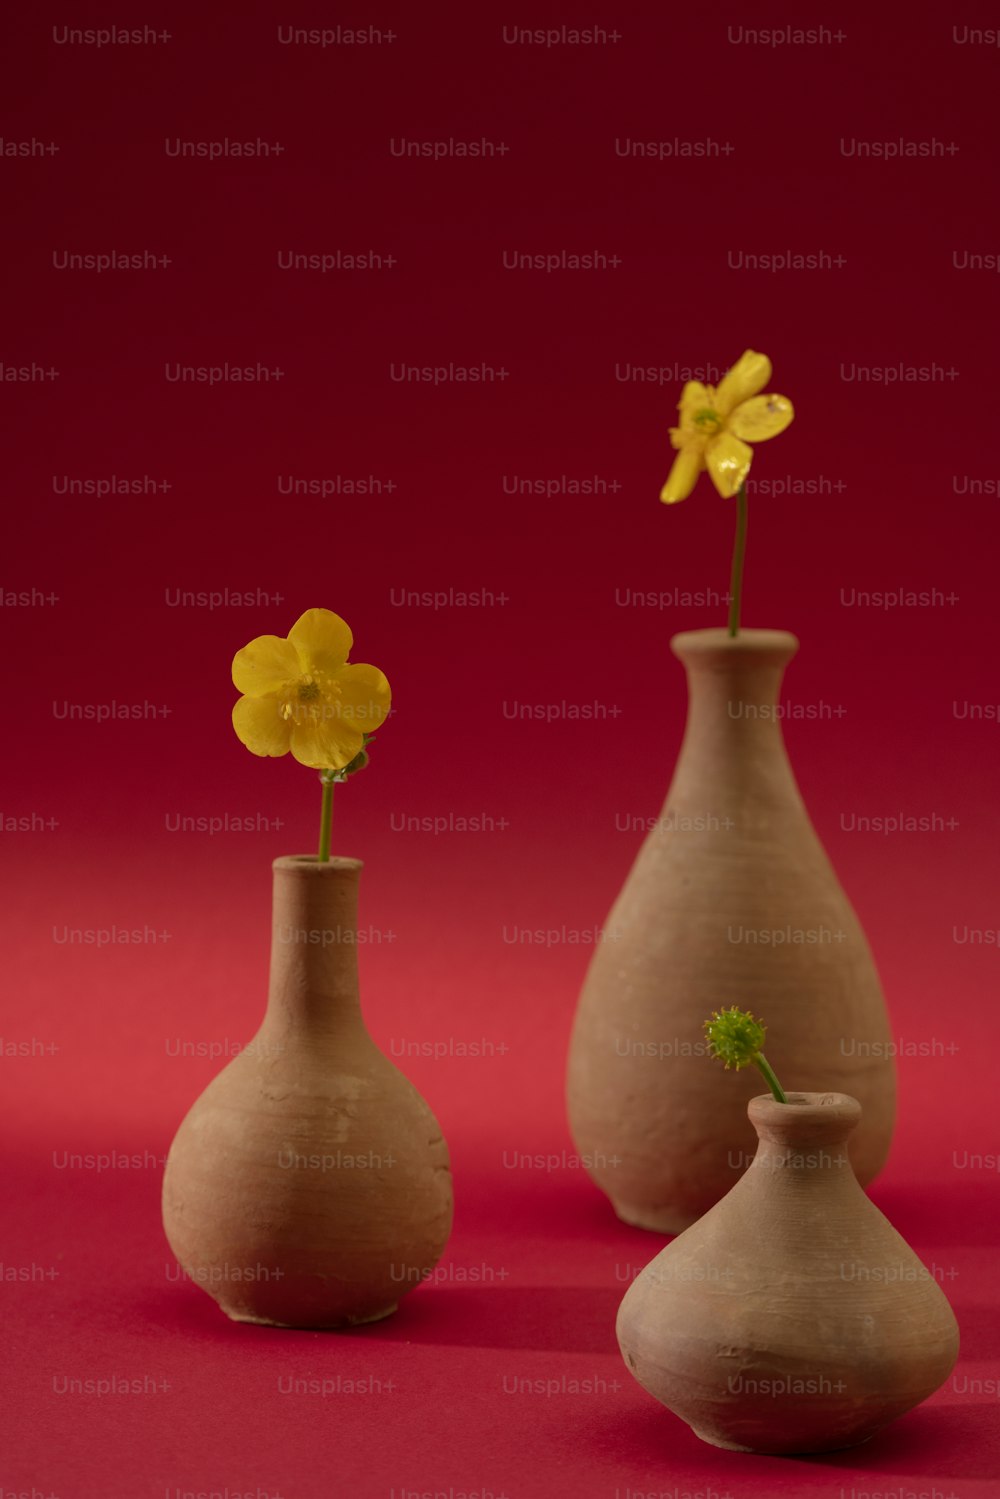 three vases with yellow flowers in them on a red background